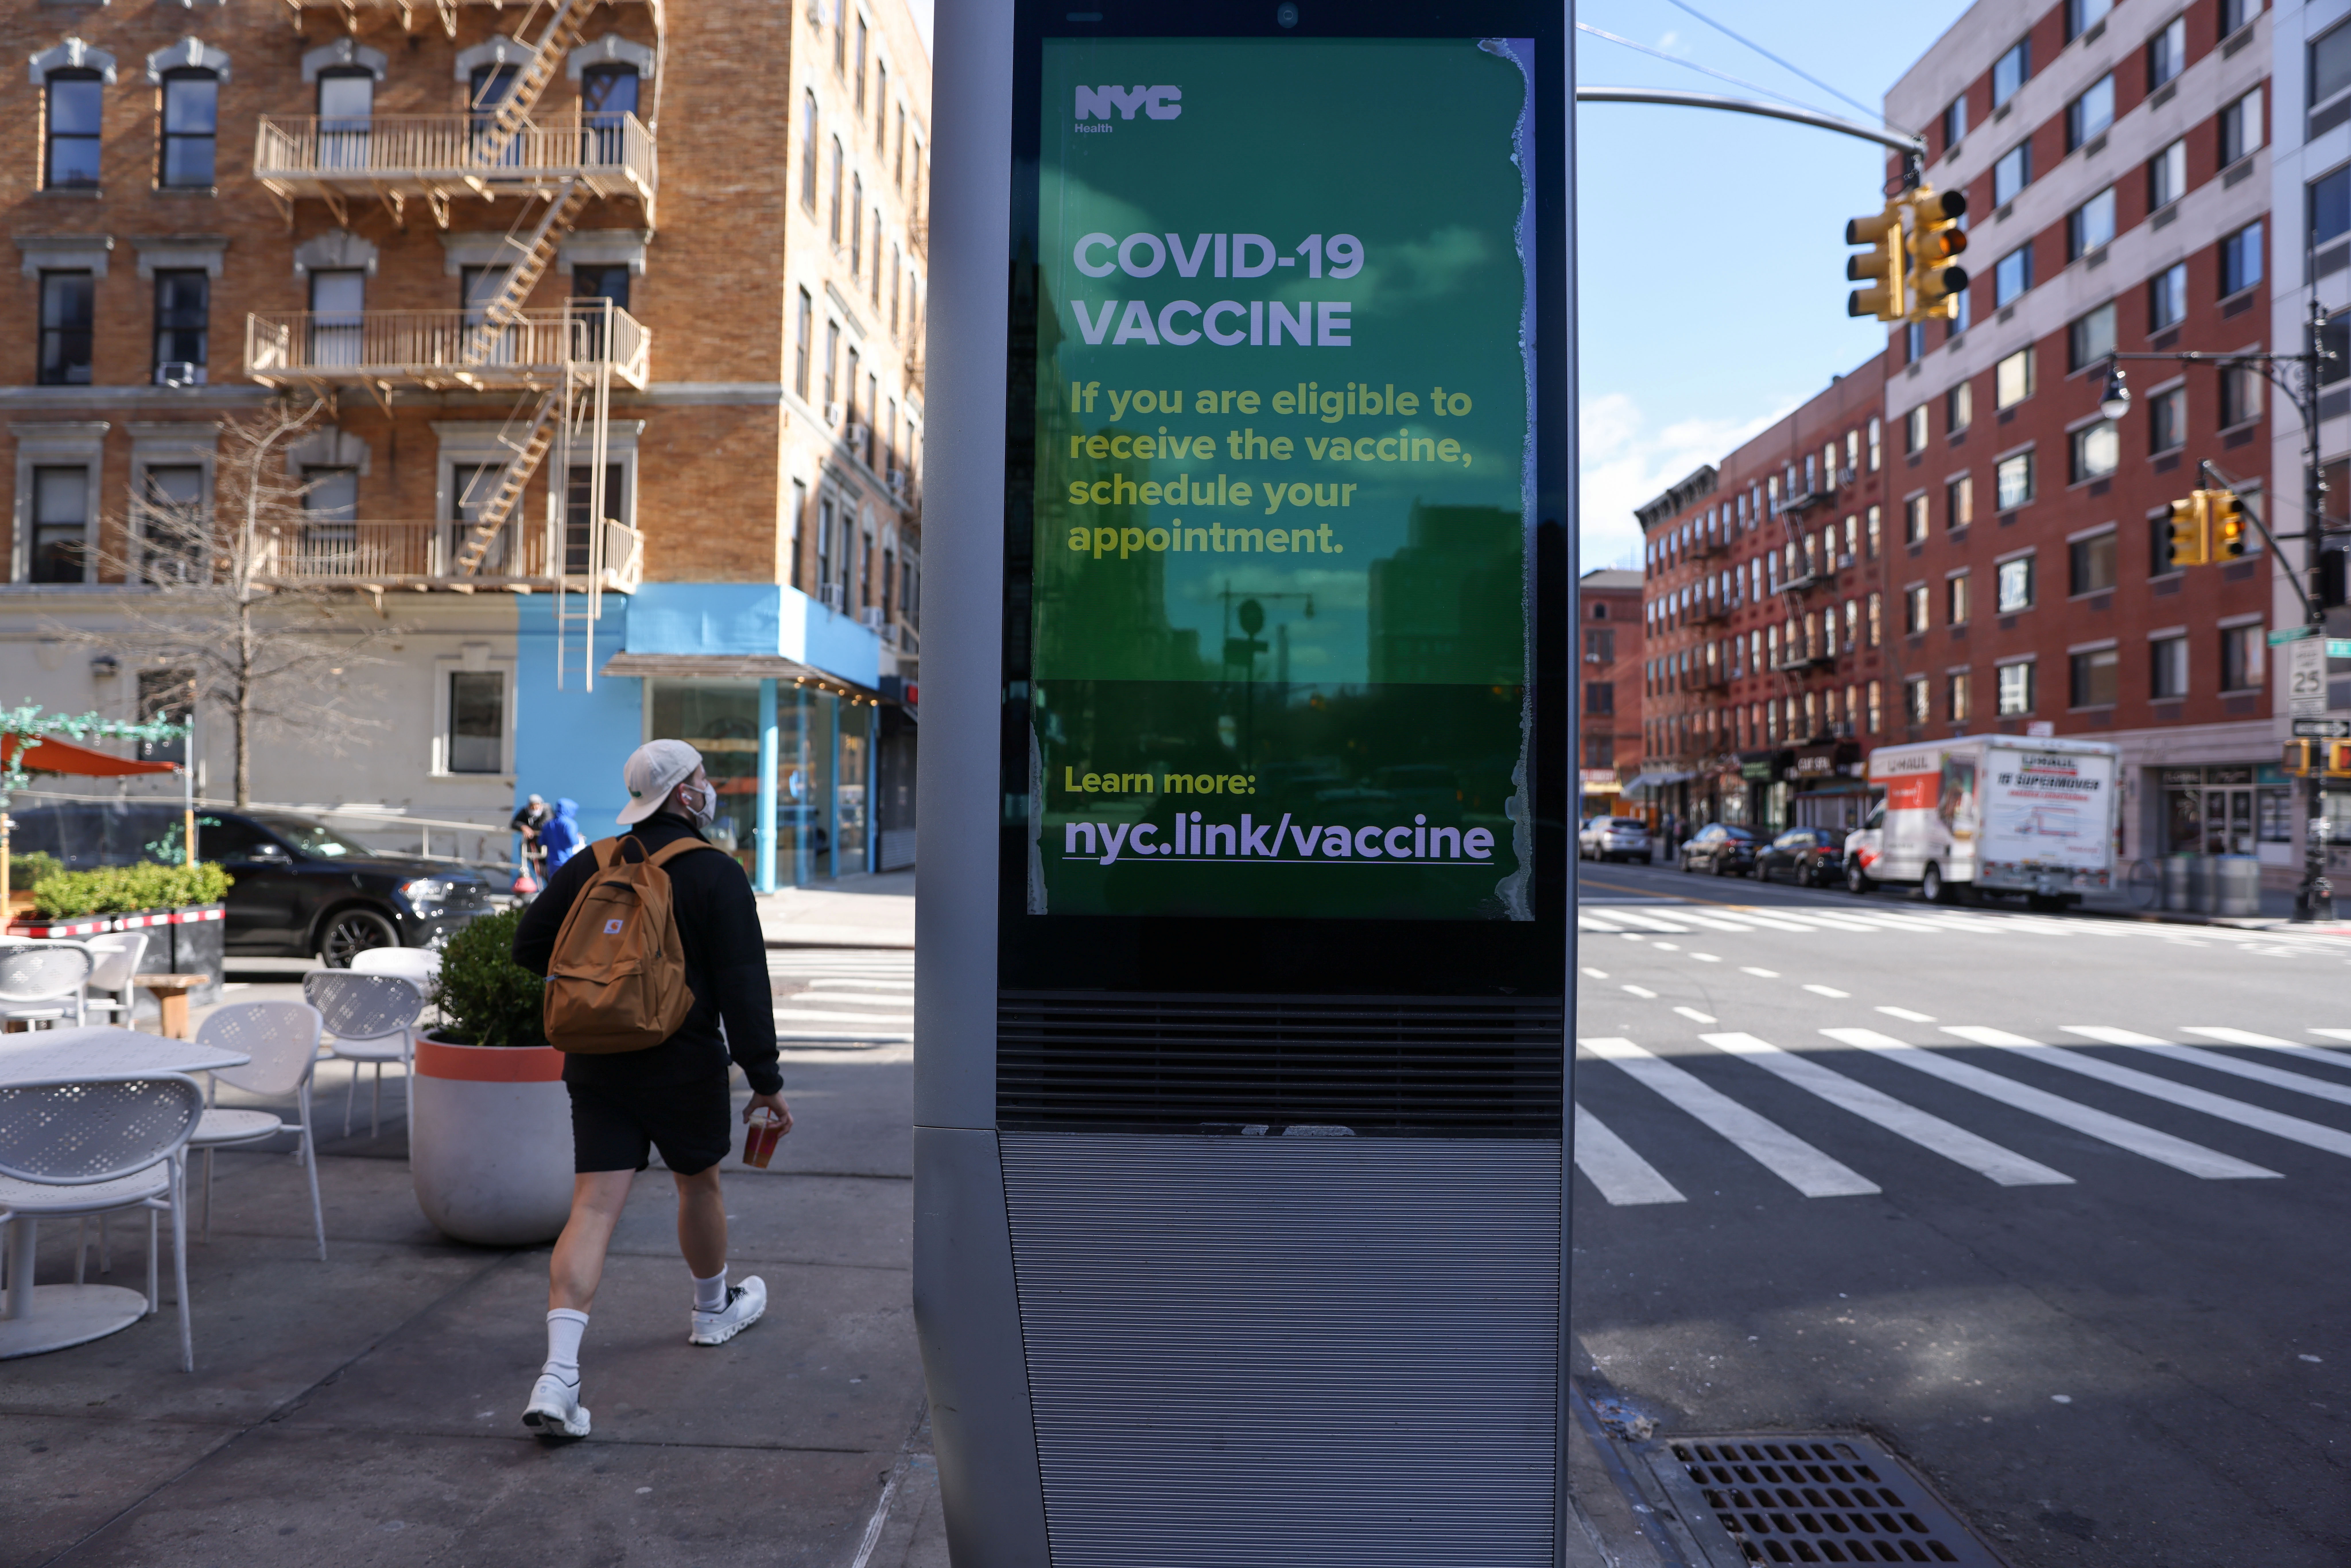 The first members of the Hassebroek family are vaccinated in New York